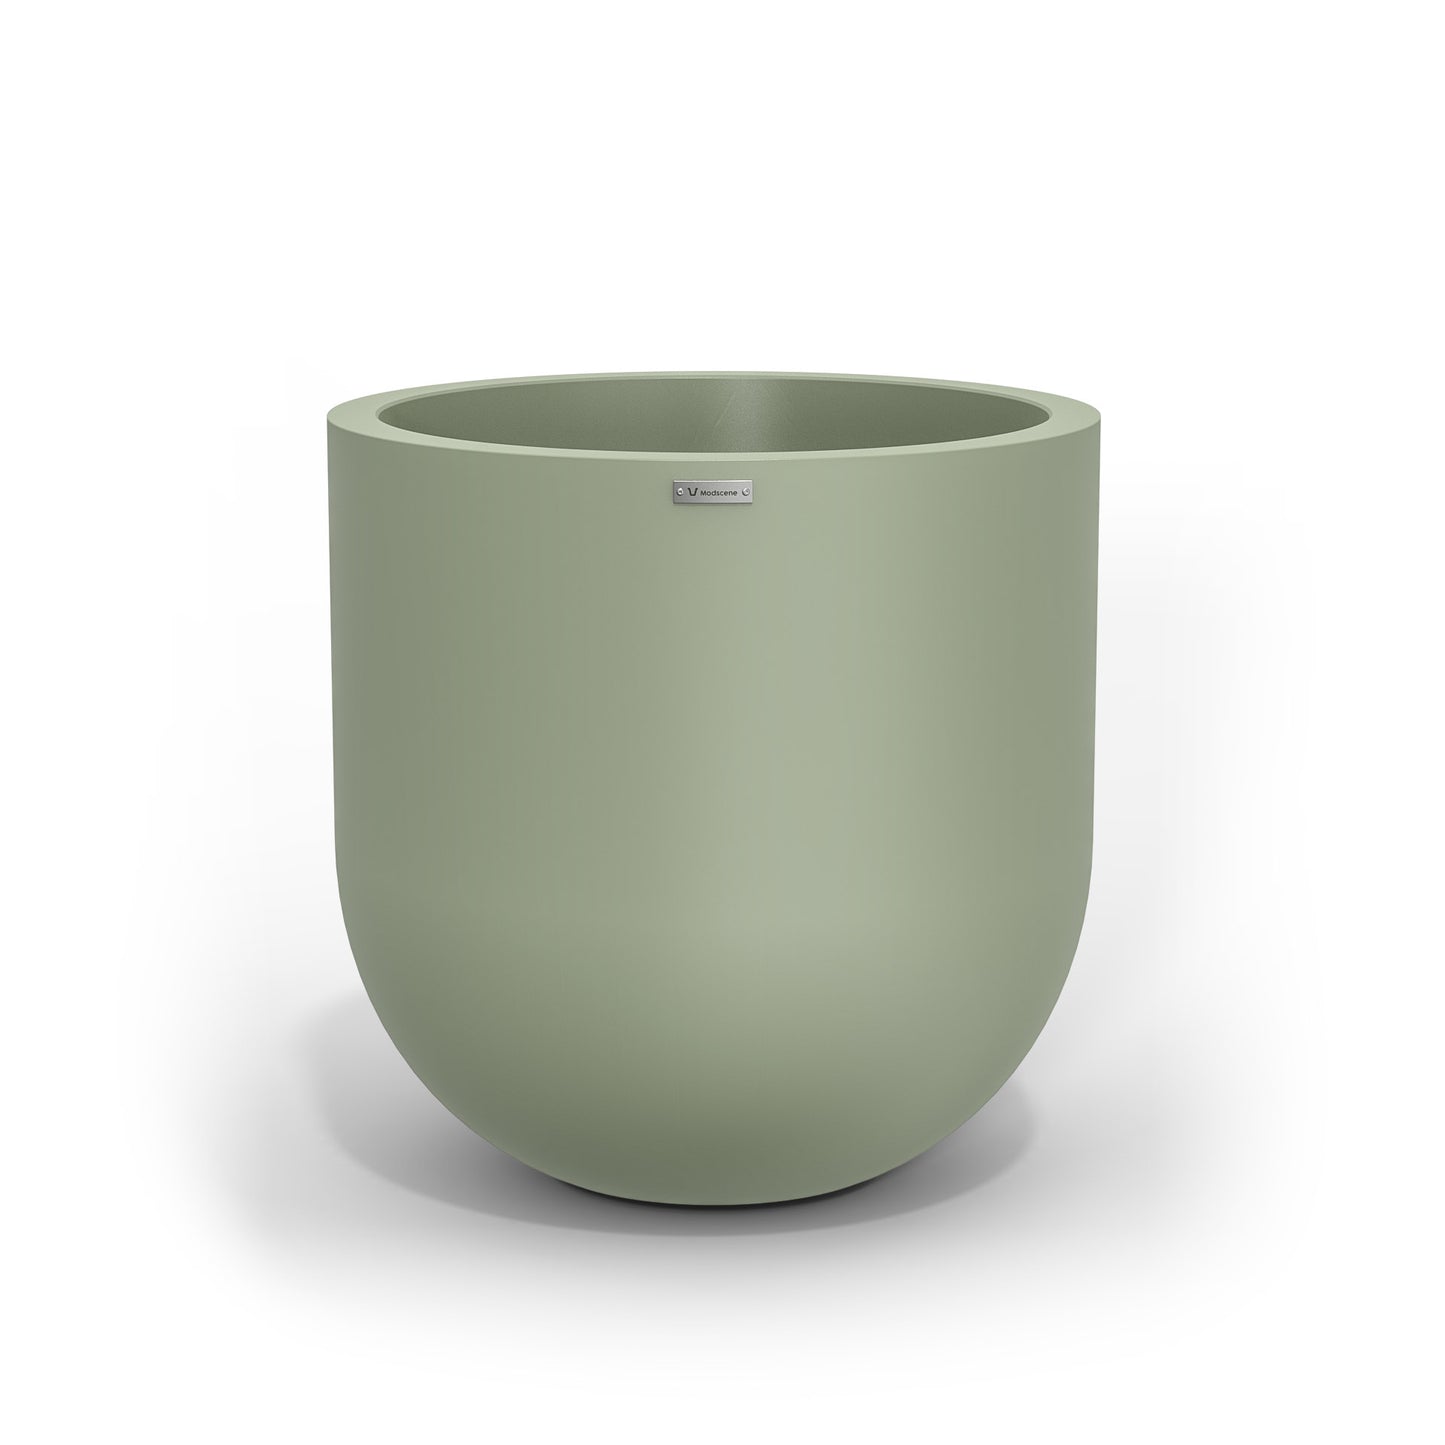 Large Modscene planter pot in a moss green colour. New Zealand made